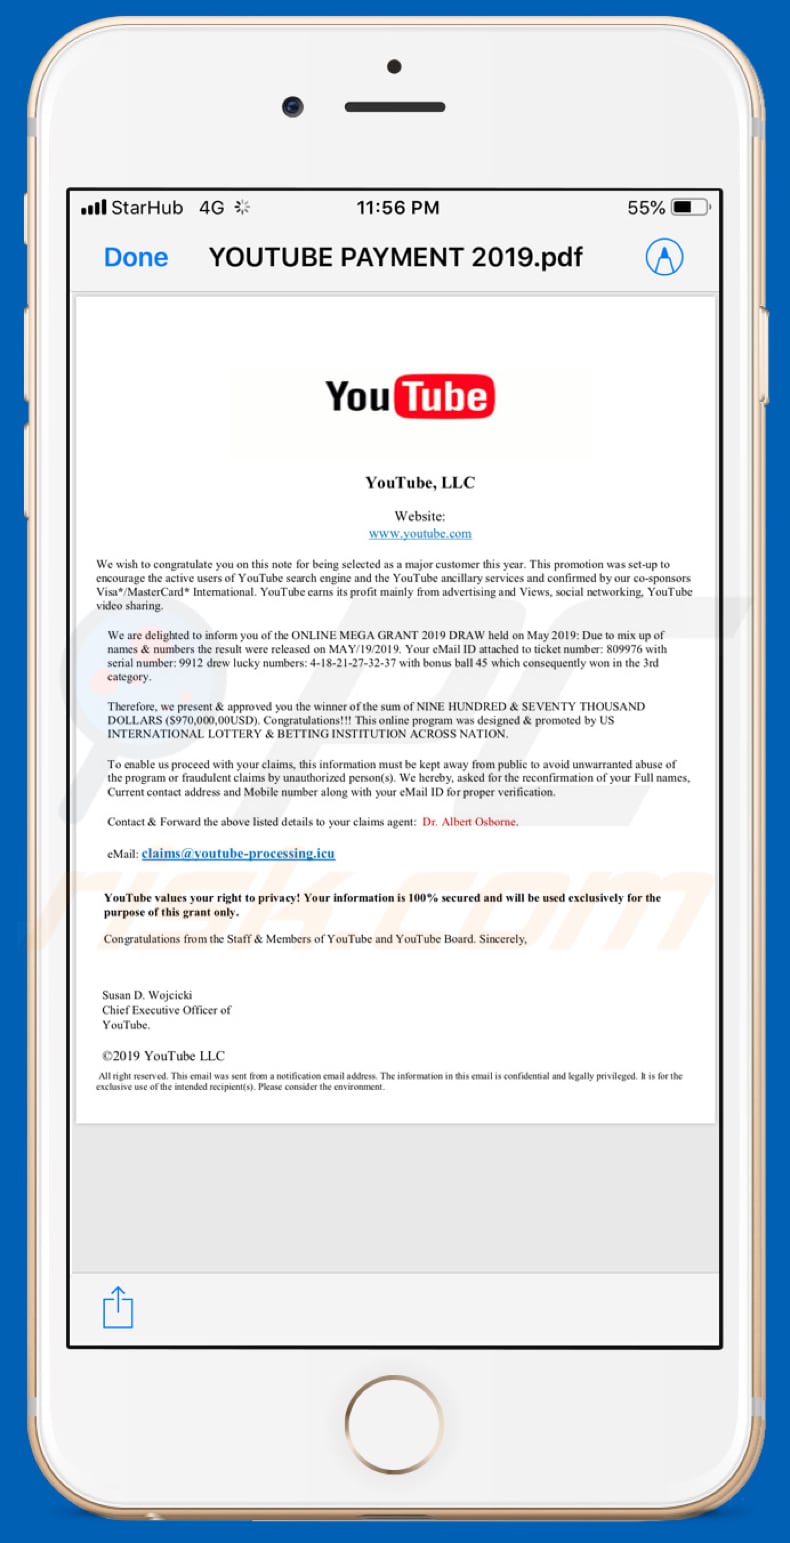 youtube lotttery email scam attachment